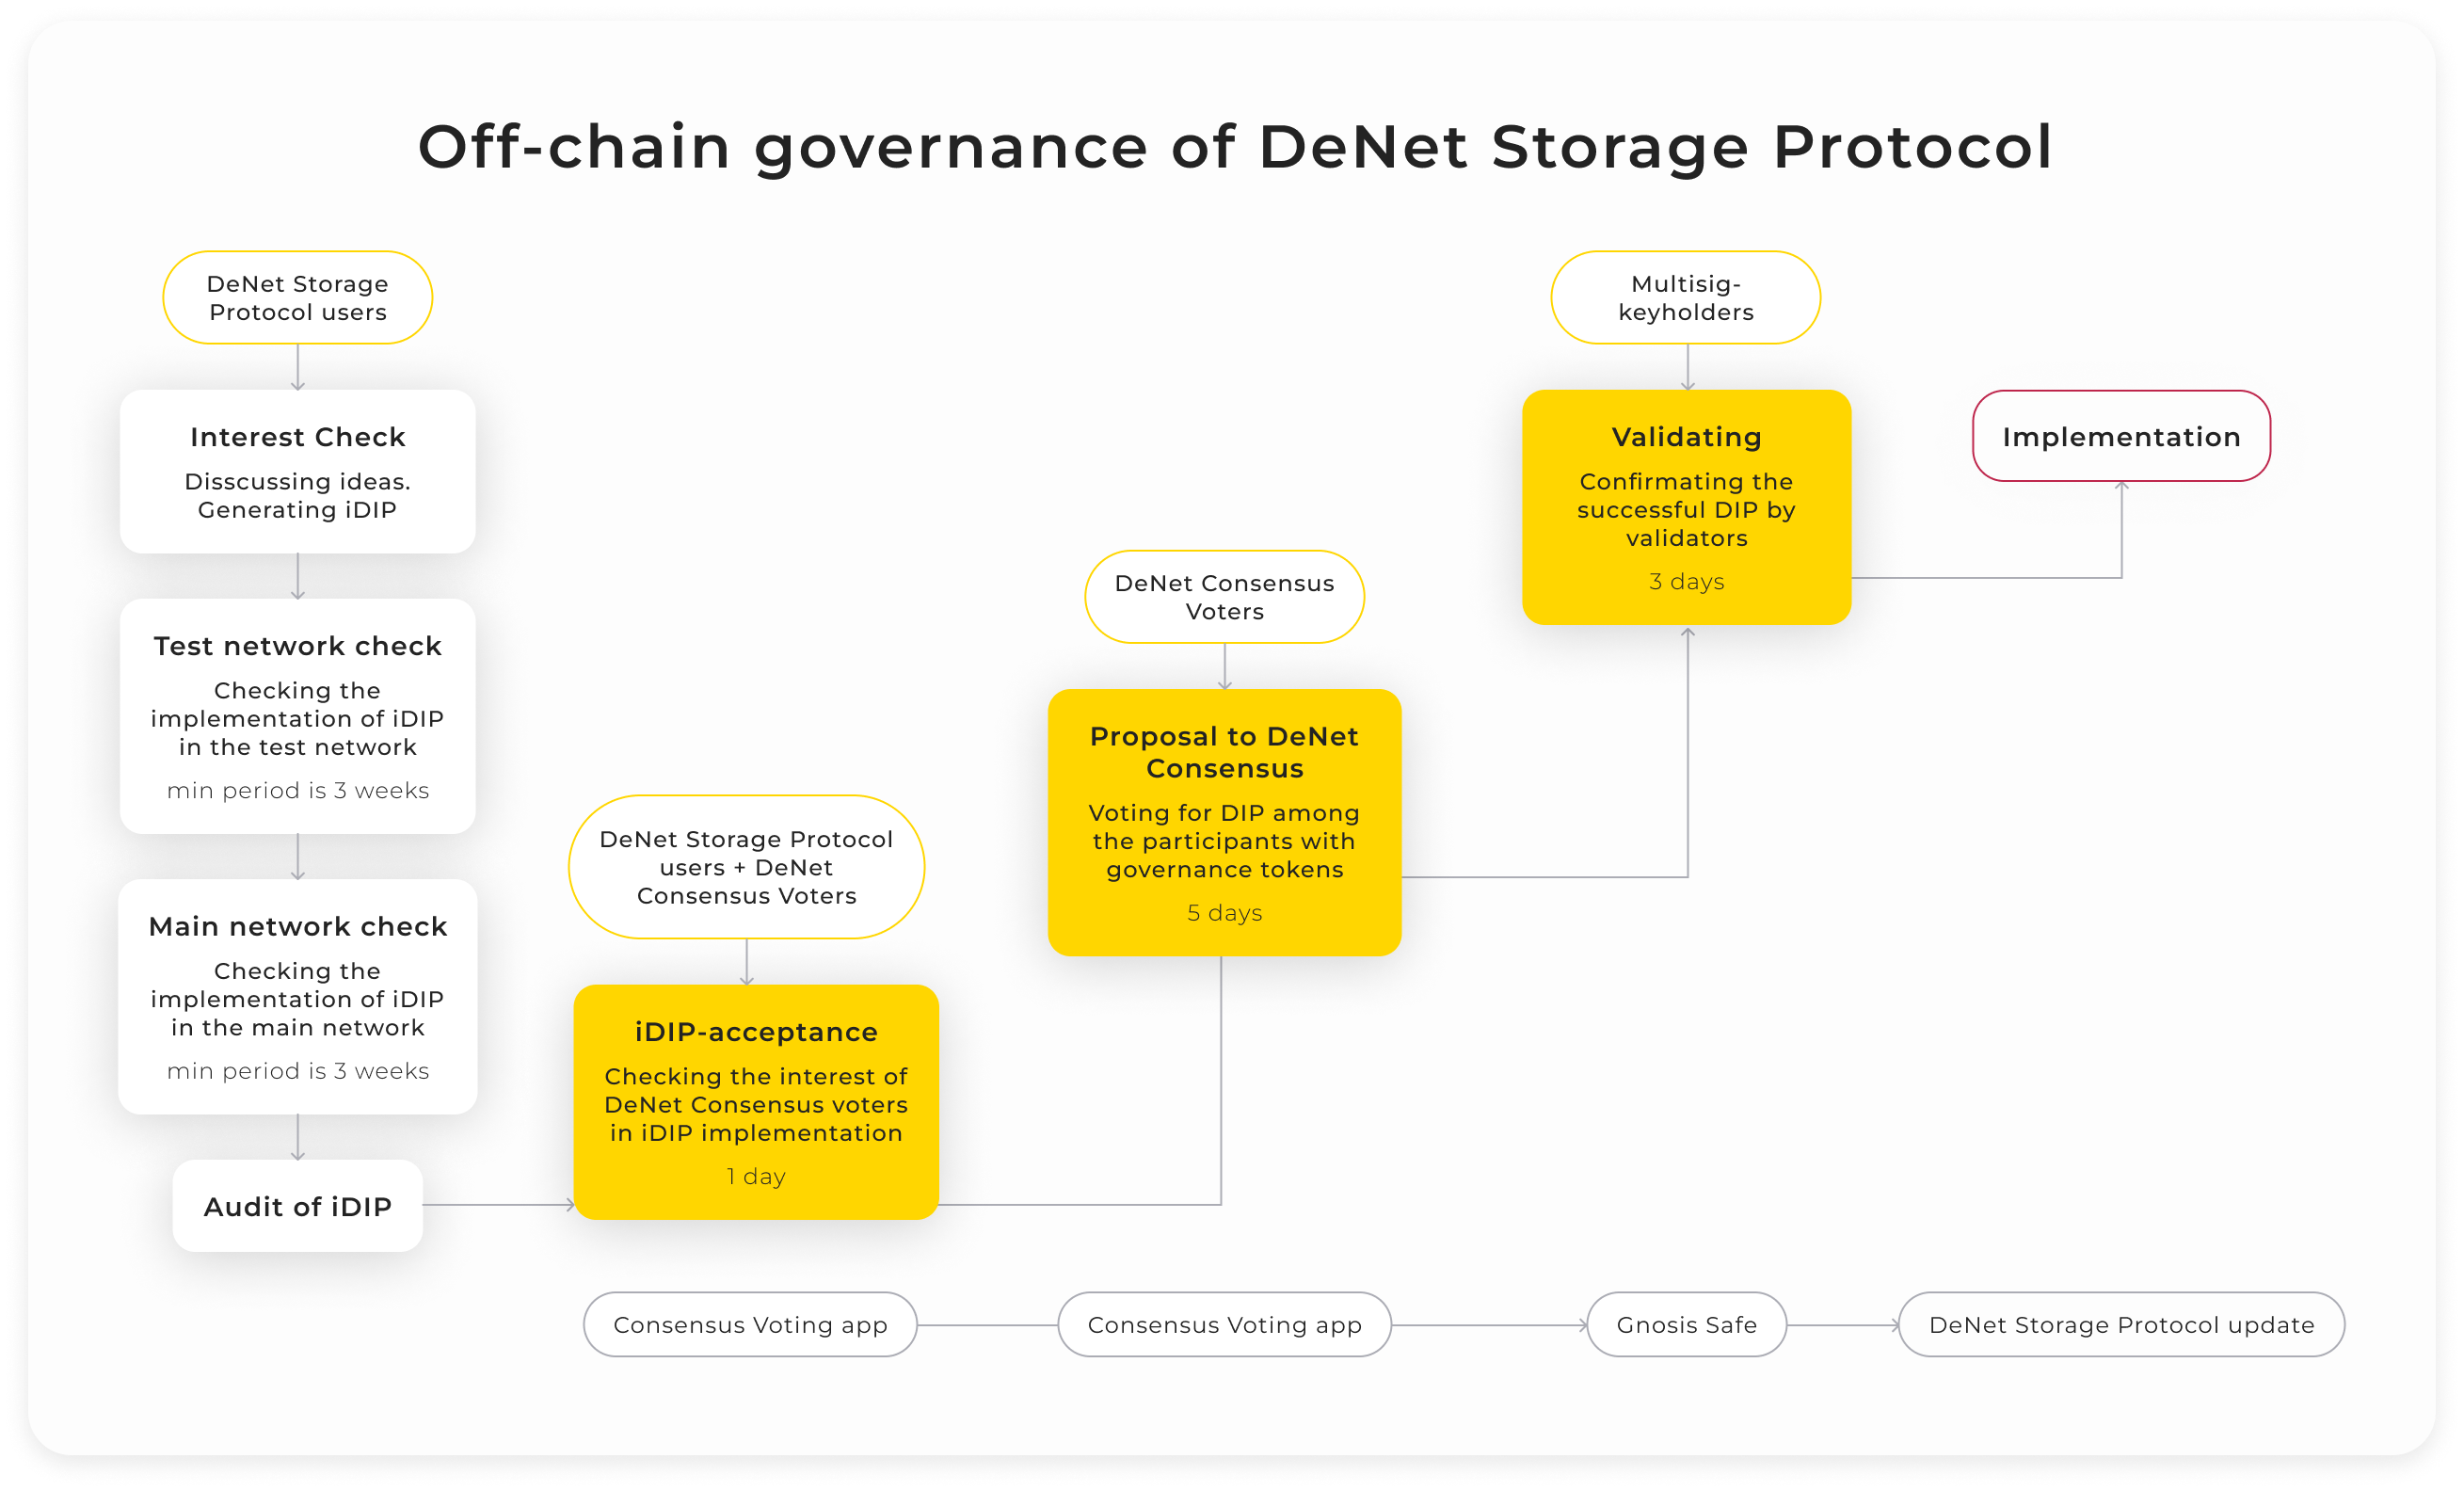 Off-chain governance structure